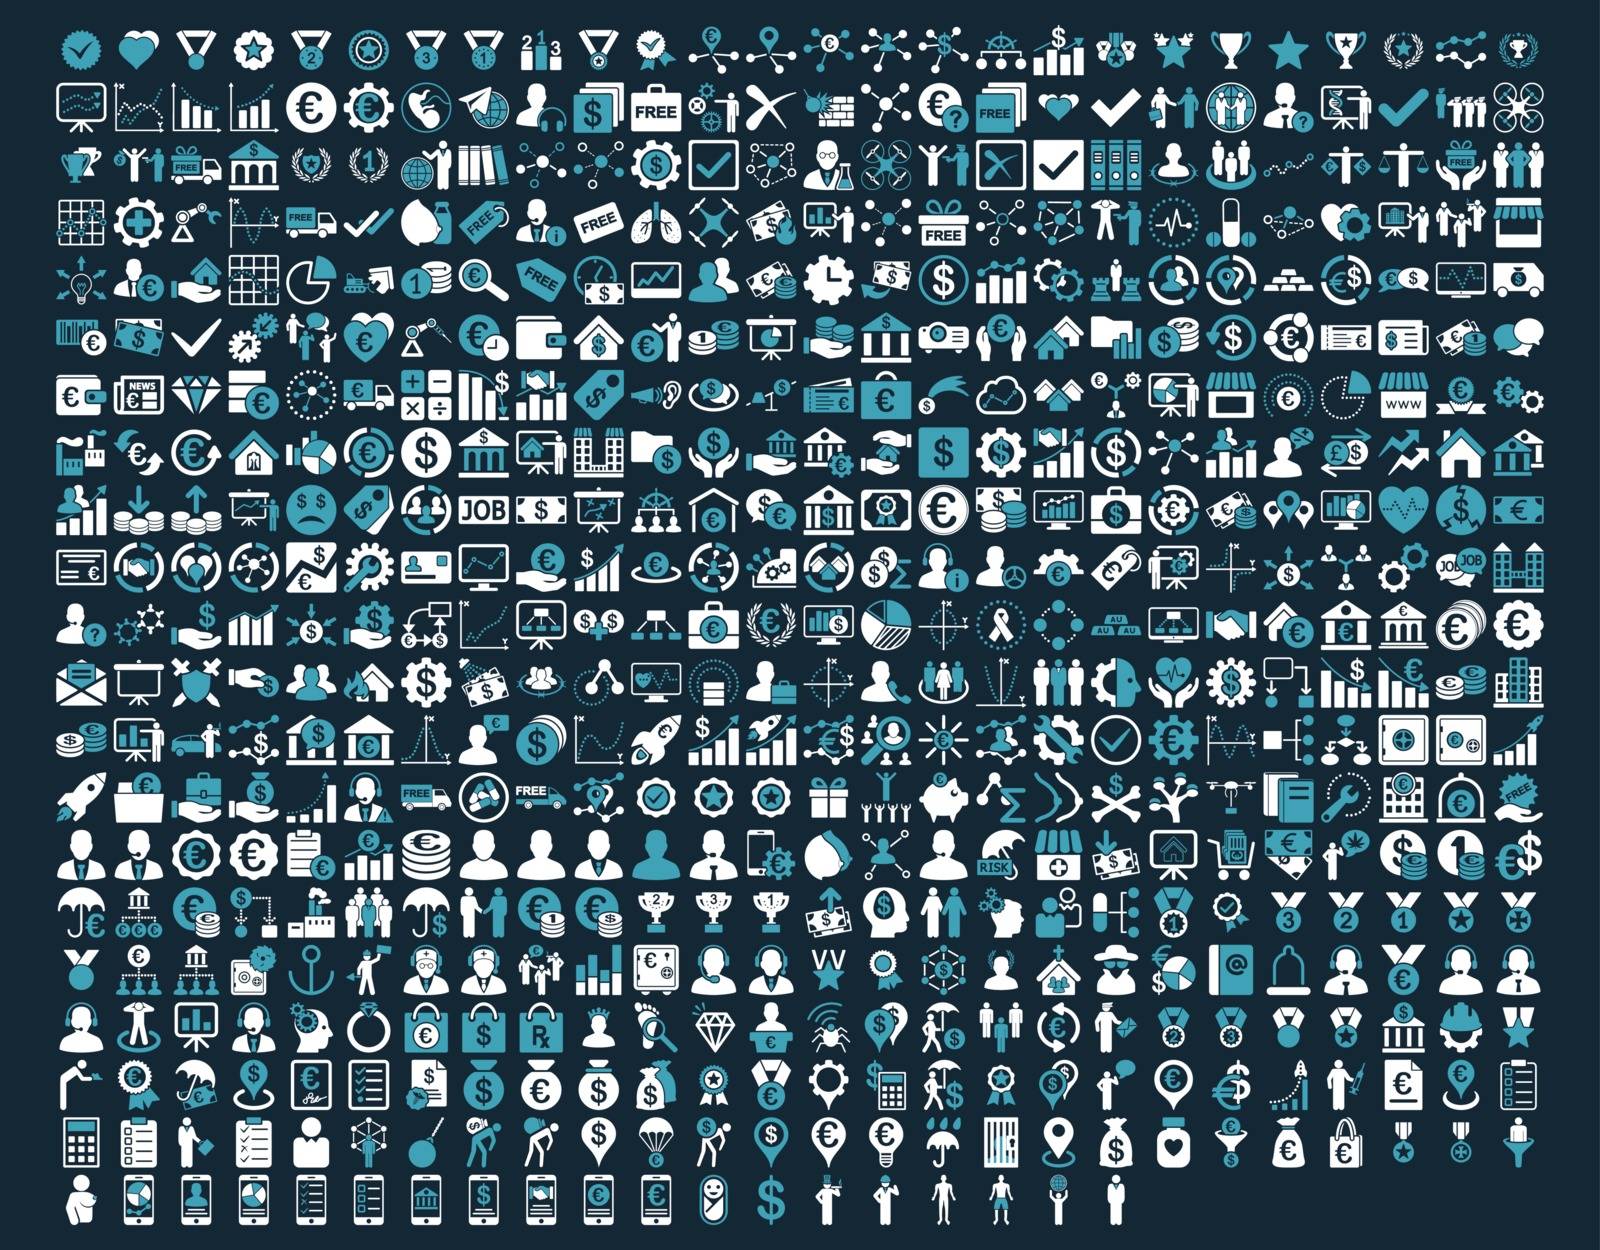 Application Toolbar Icons. 576 flat bicolor icons use blue and white colors. Vector images are isolated on a dark blue background. 